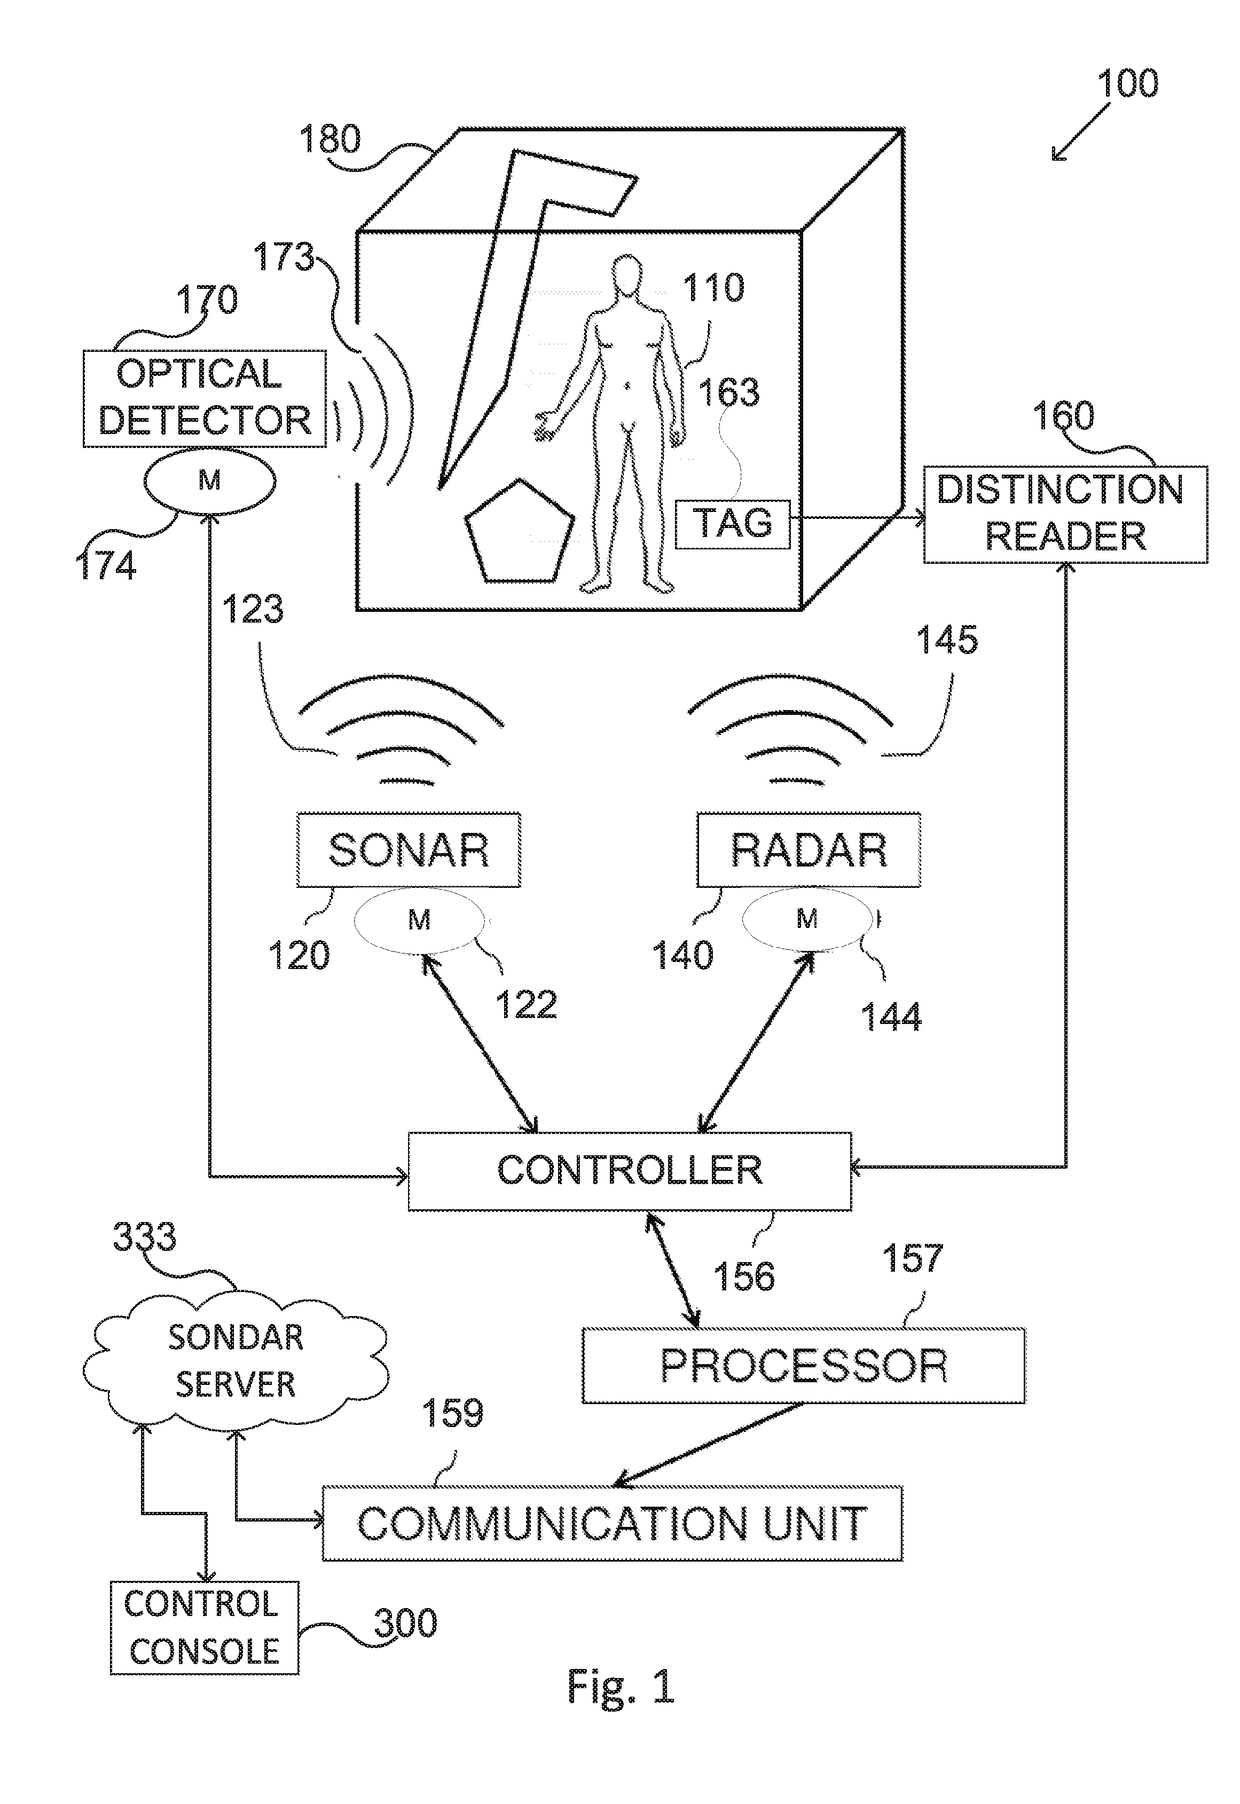 Remote monitoring system of human activity